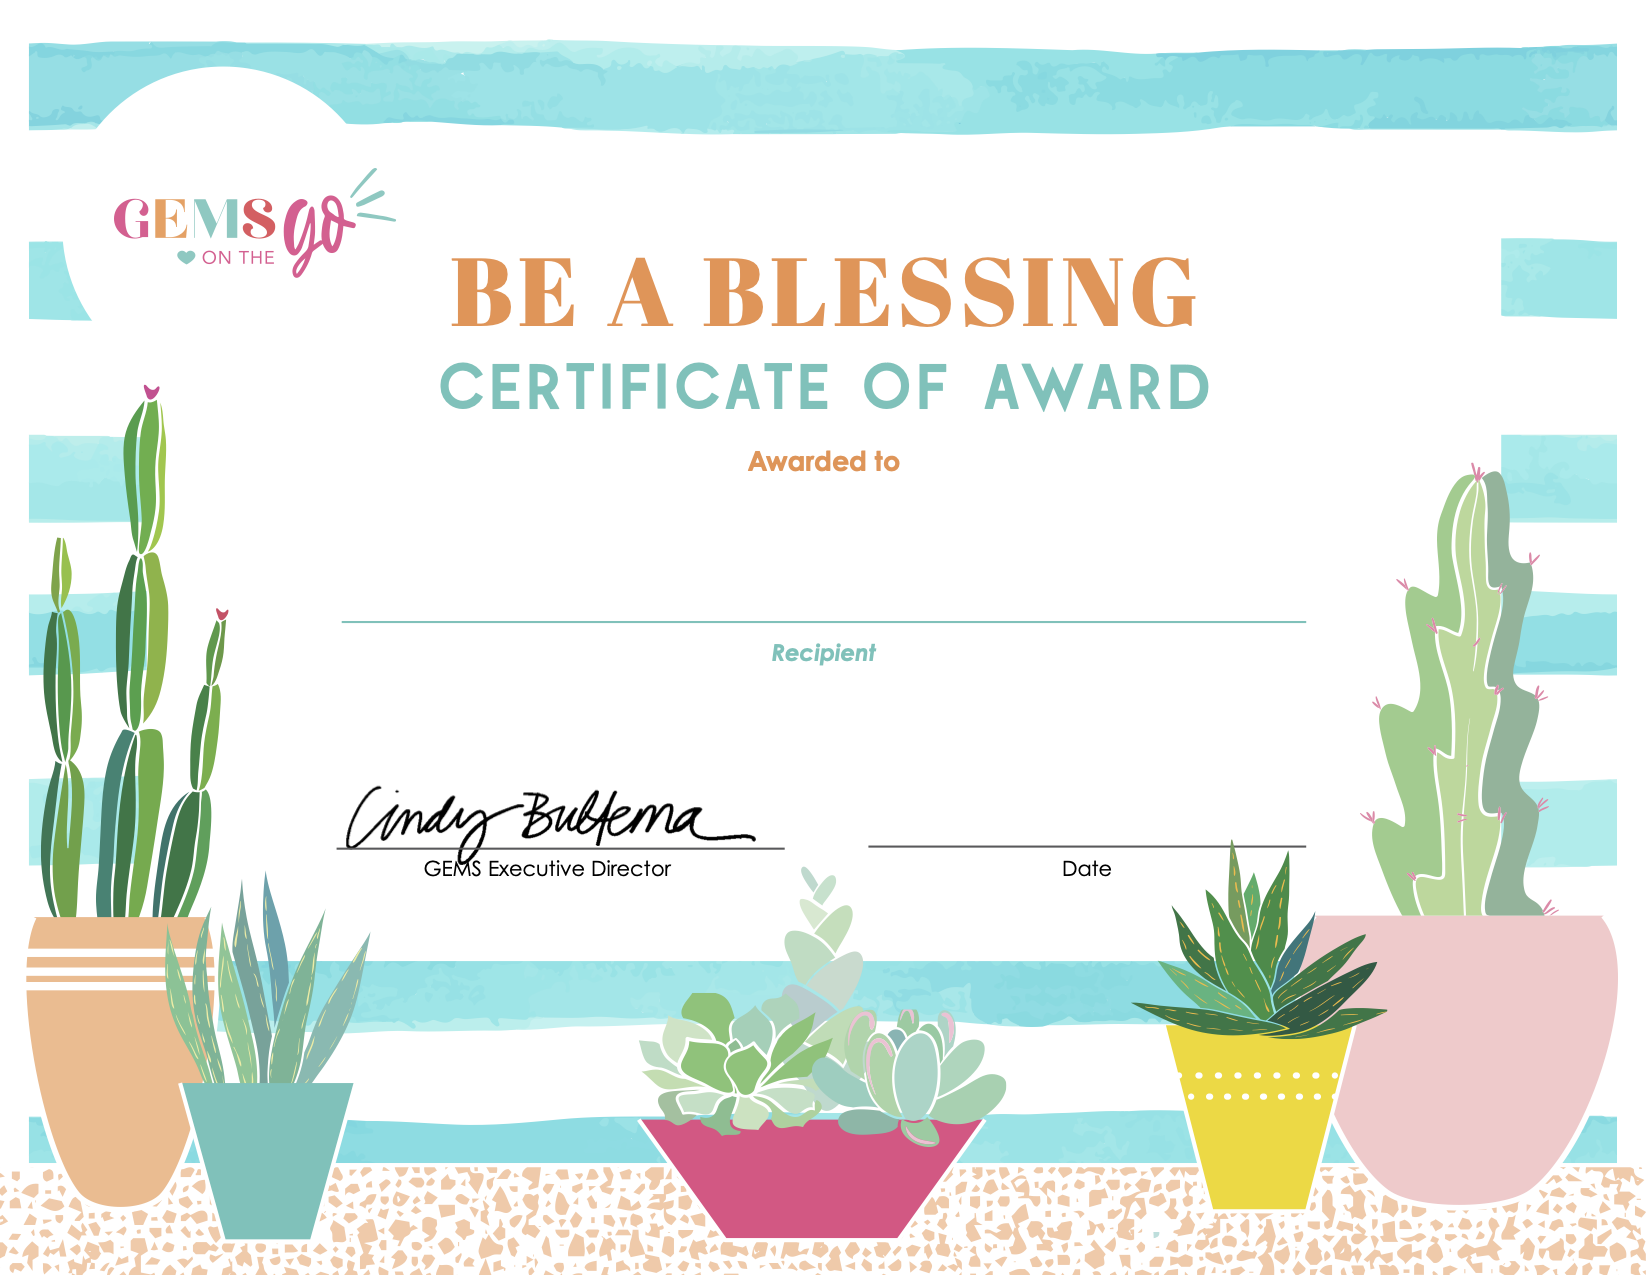 Be a Blessing Badge and Certificate